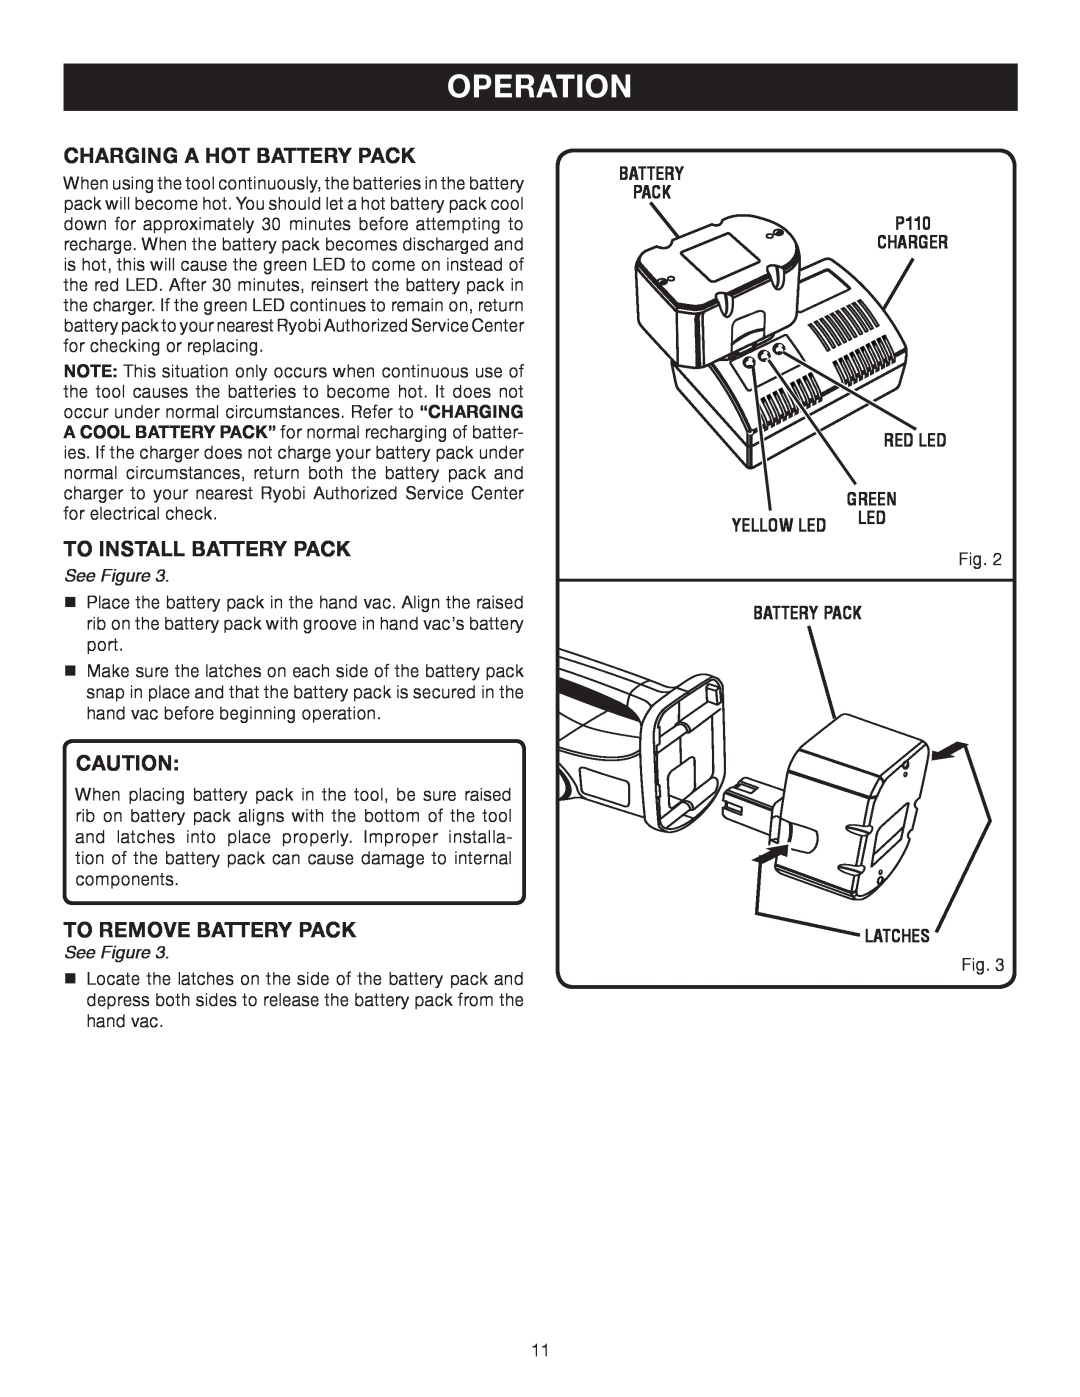 Ryobi P710 manual Charging A Hot Battery Pack, To Install Battery Pack, To Remove Battery Pack, Operation, See Figure 